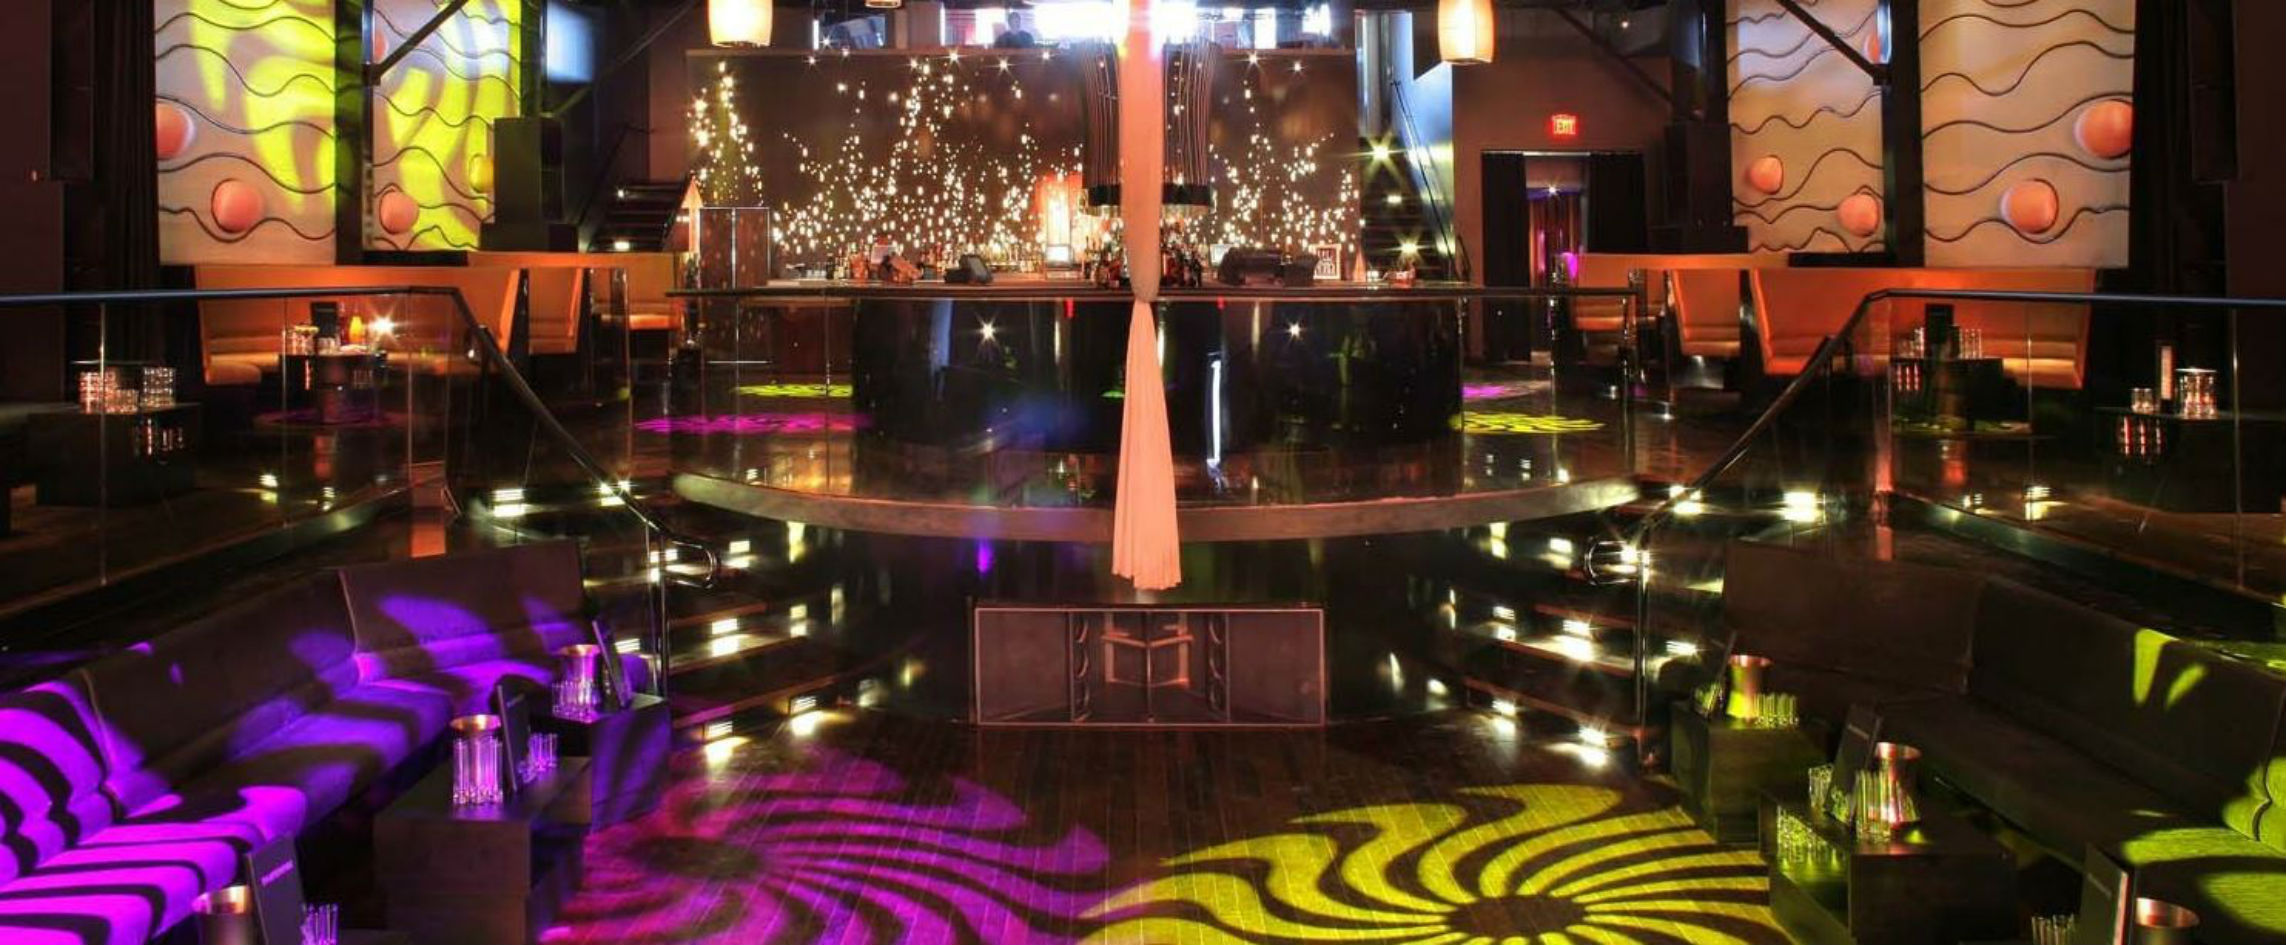 Playhouse Hollywood Los Angeles - Bottle Service and VIP Table Booking